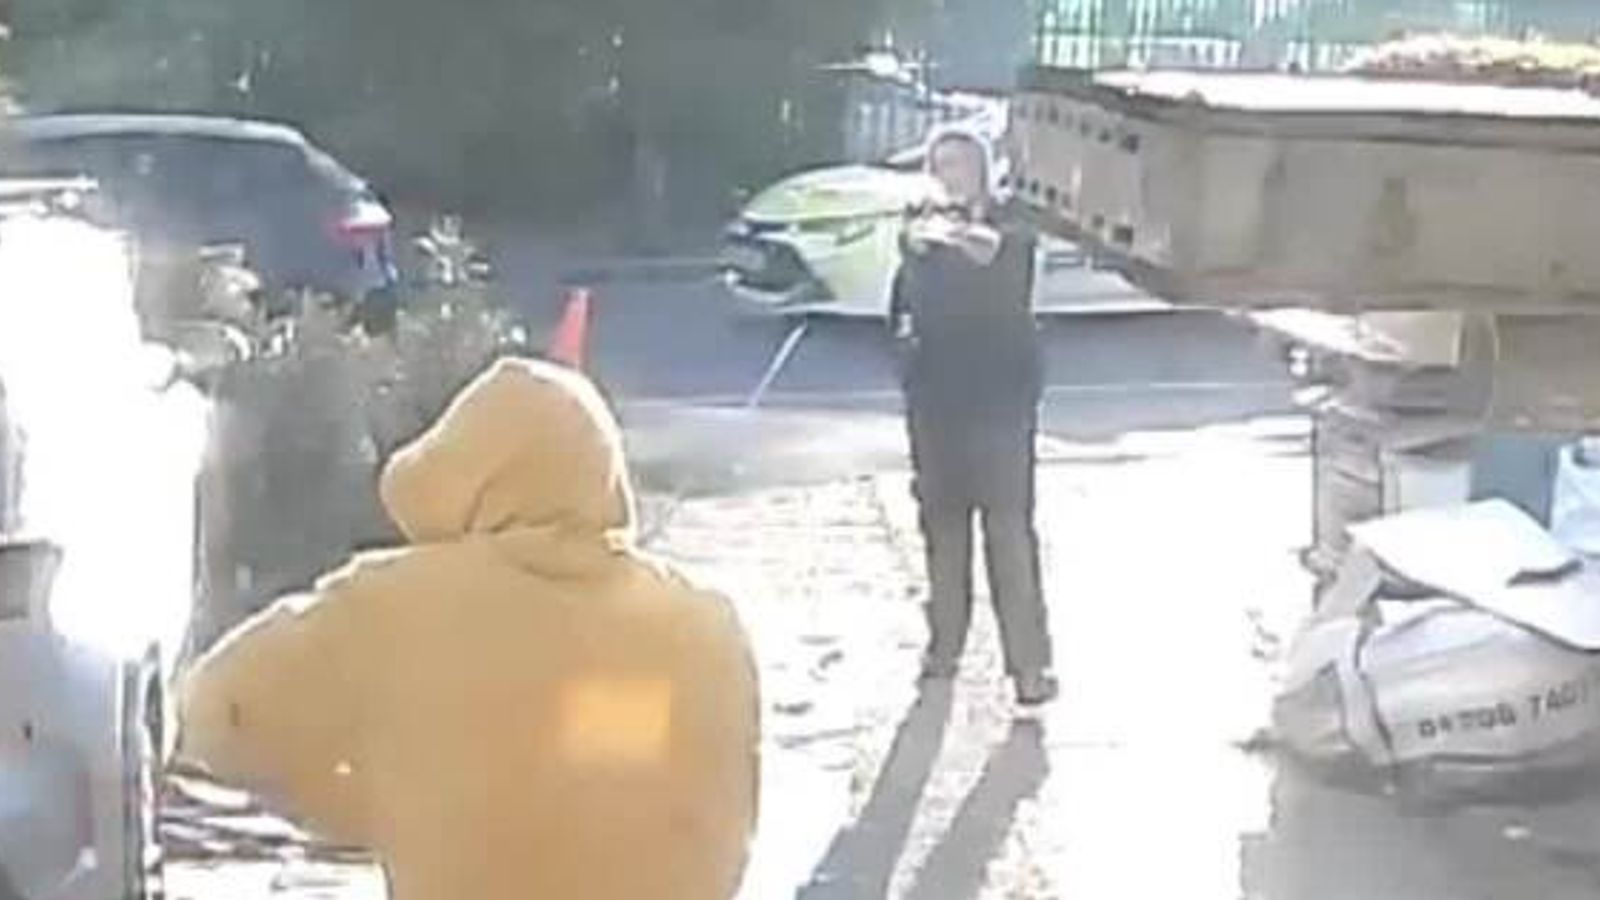 Video shows moment Hainault sword attack suspect is tasered and arrested